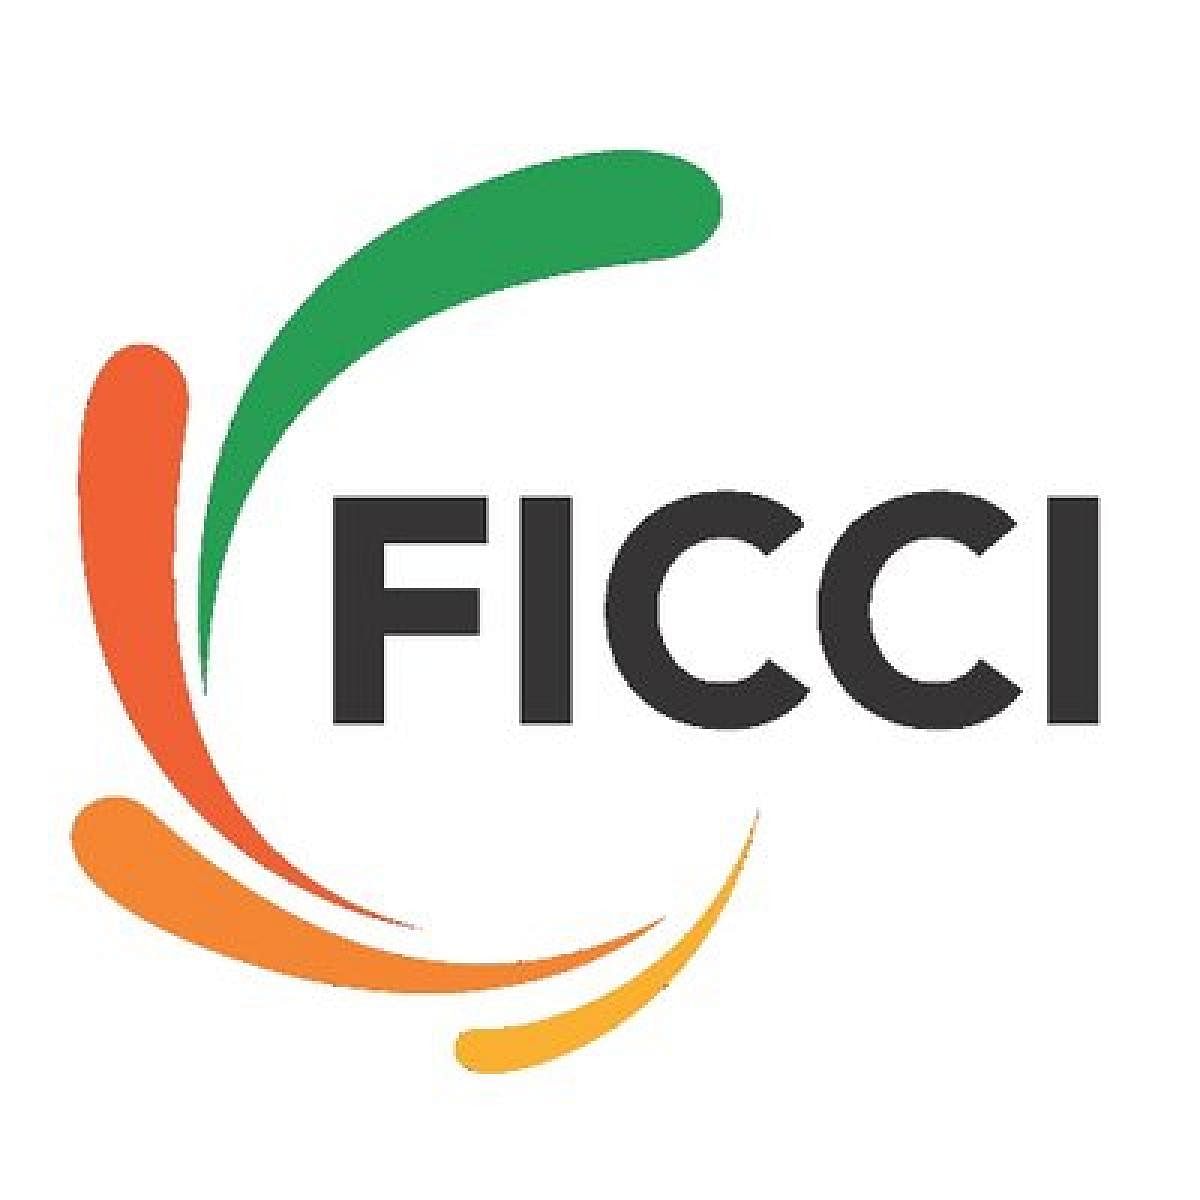 Federation of Indian Chambers of Commerce and Industry (FICCI) (DH Photo)